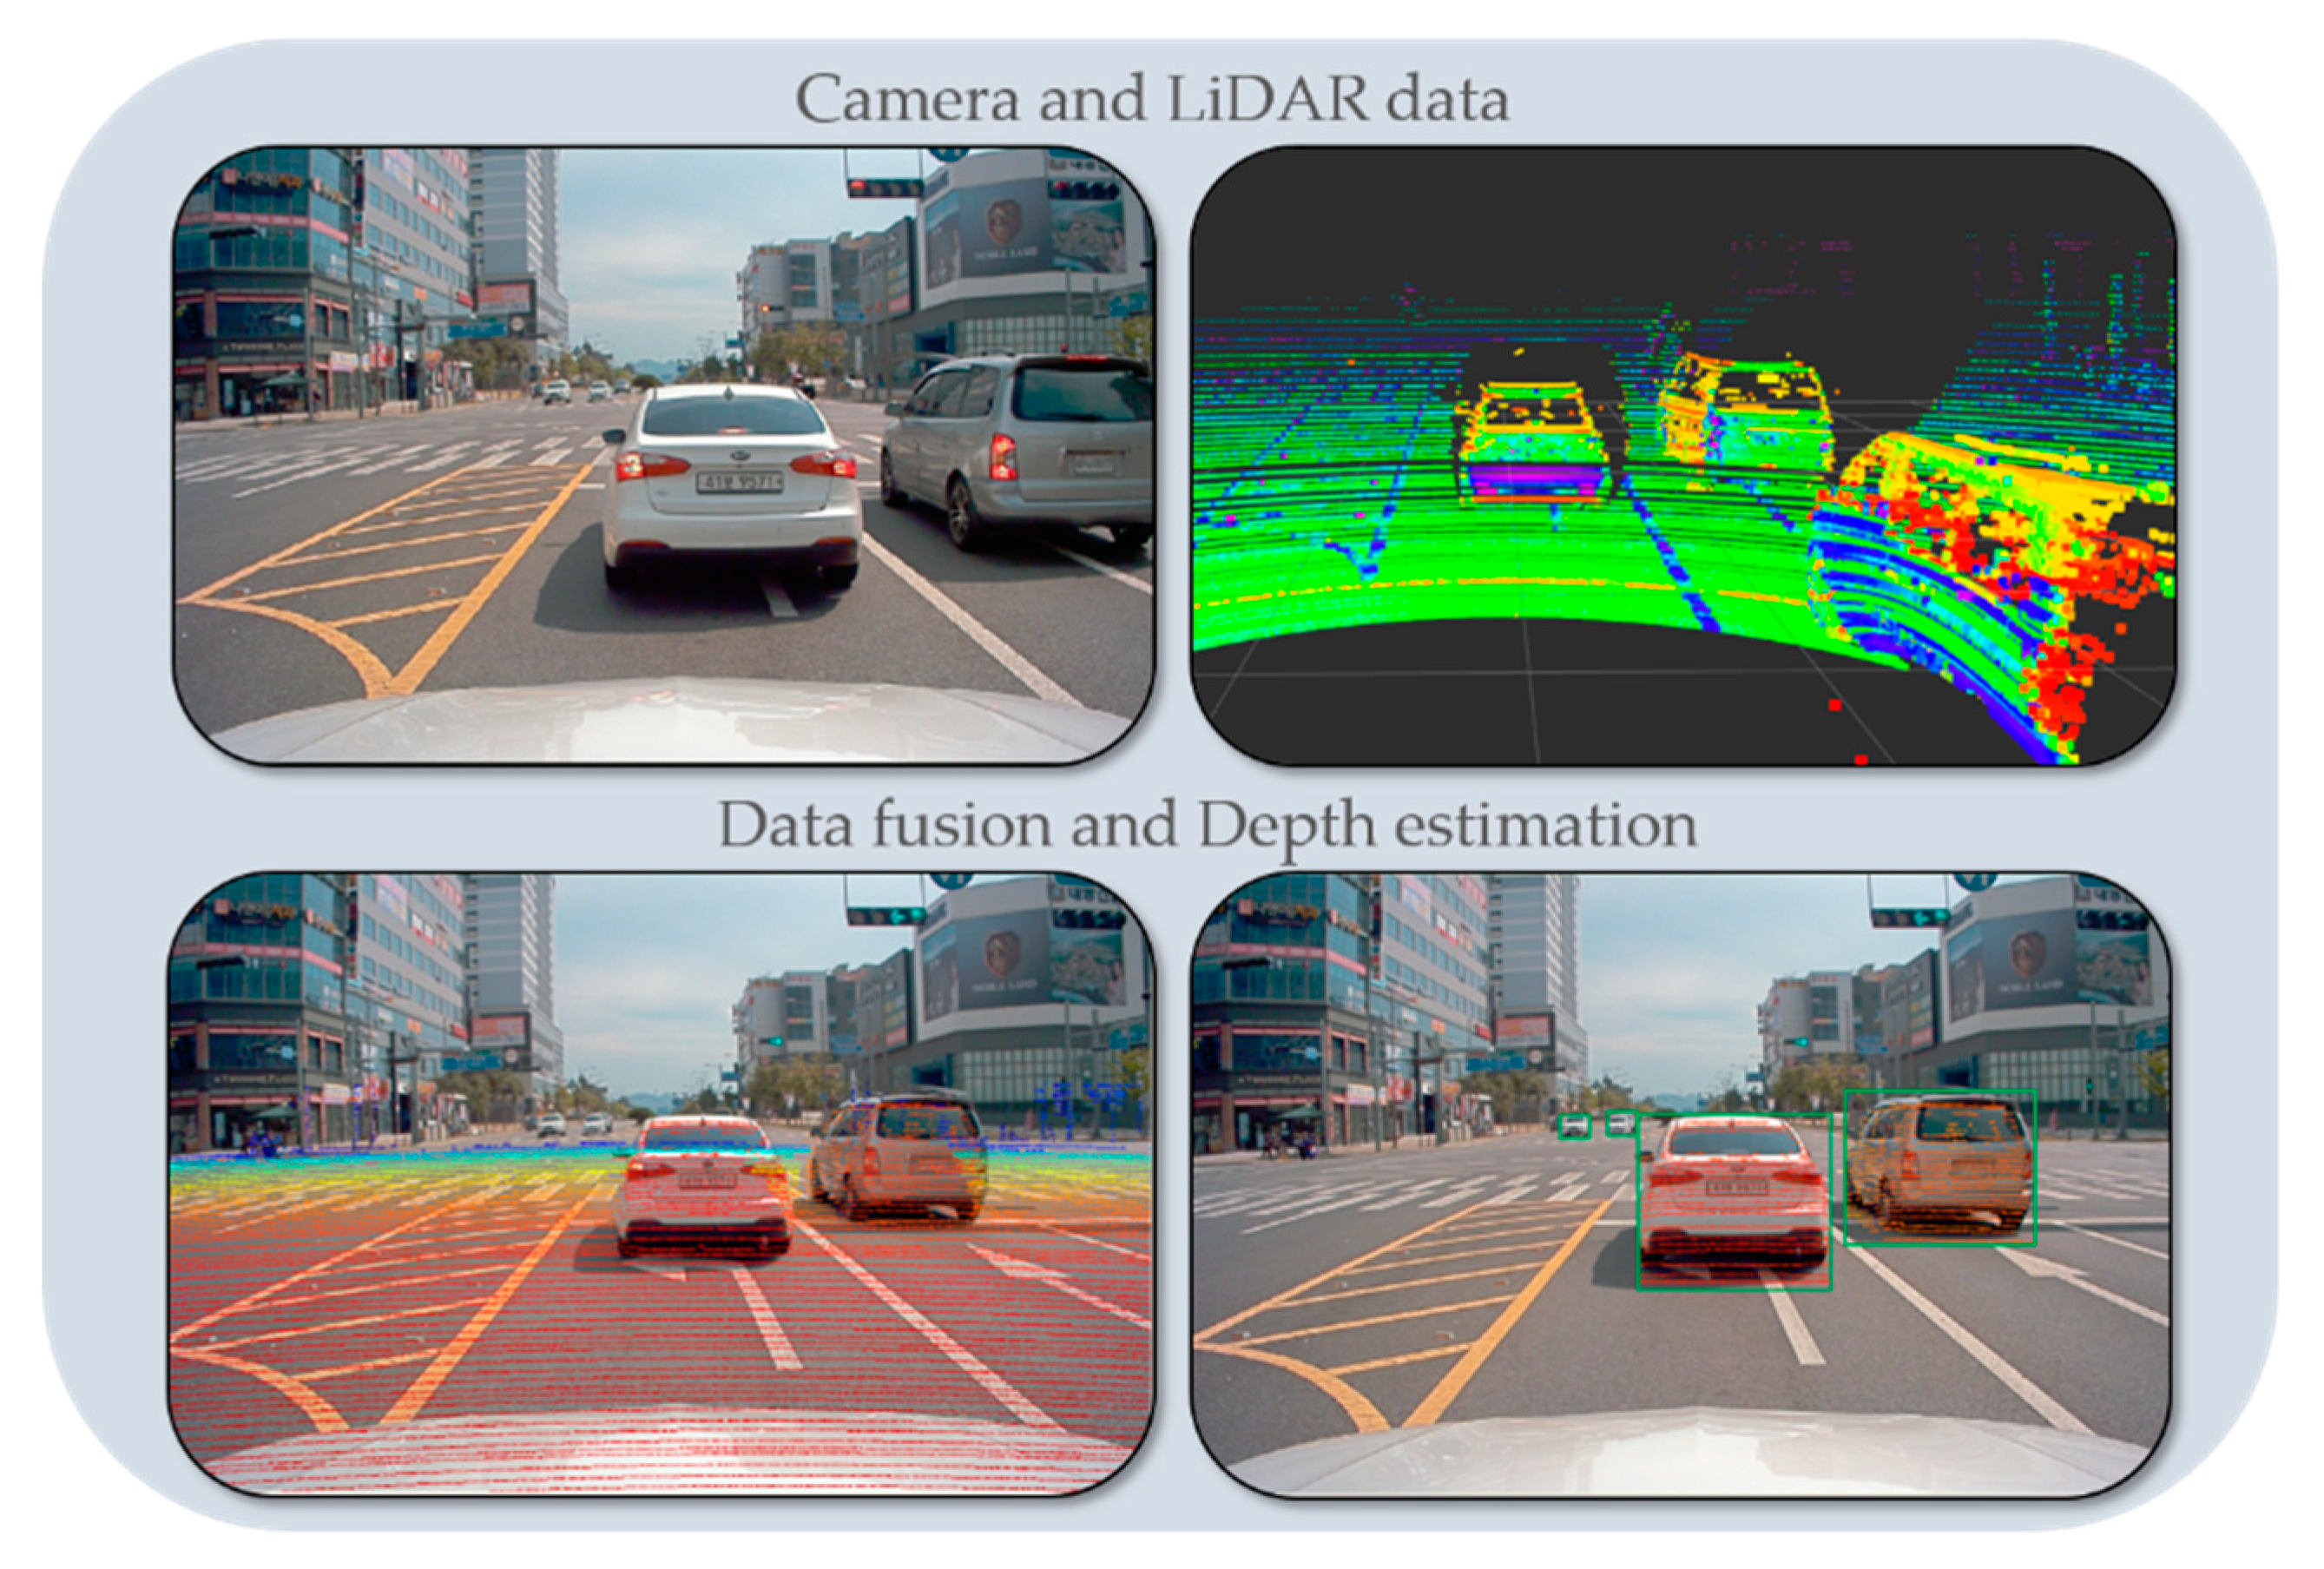 Symmetry | Free Full-Text | LiDAR and Camera Fusion Approach for Object  Distance Estimation in Self-Driving Vehicles | HTML